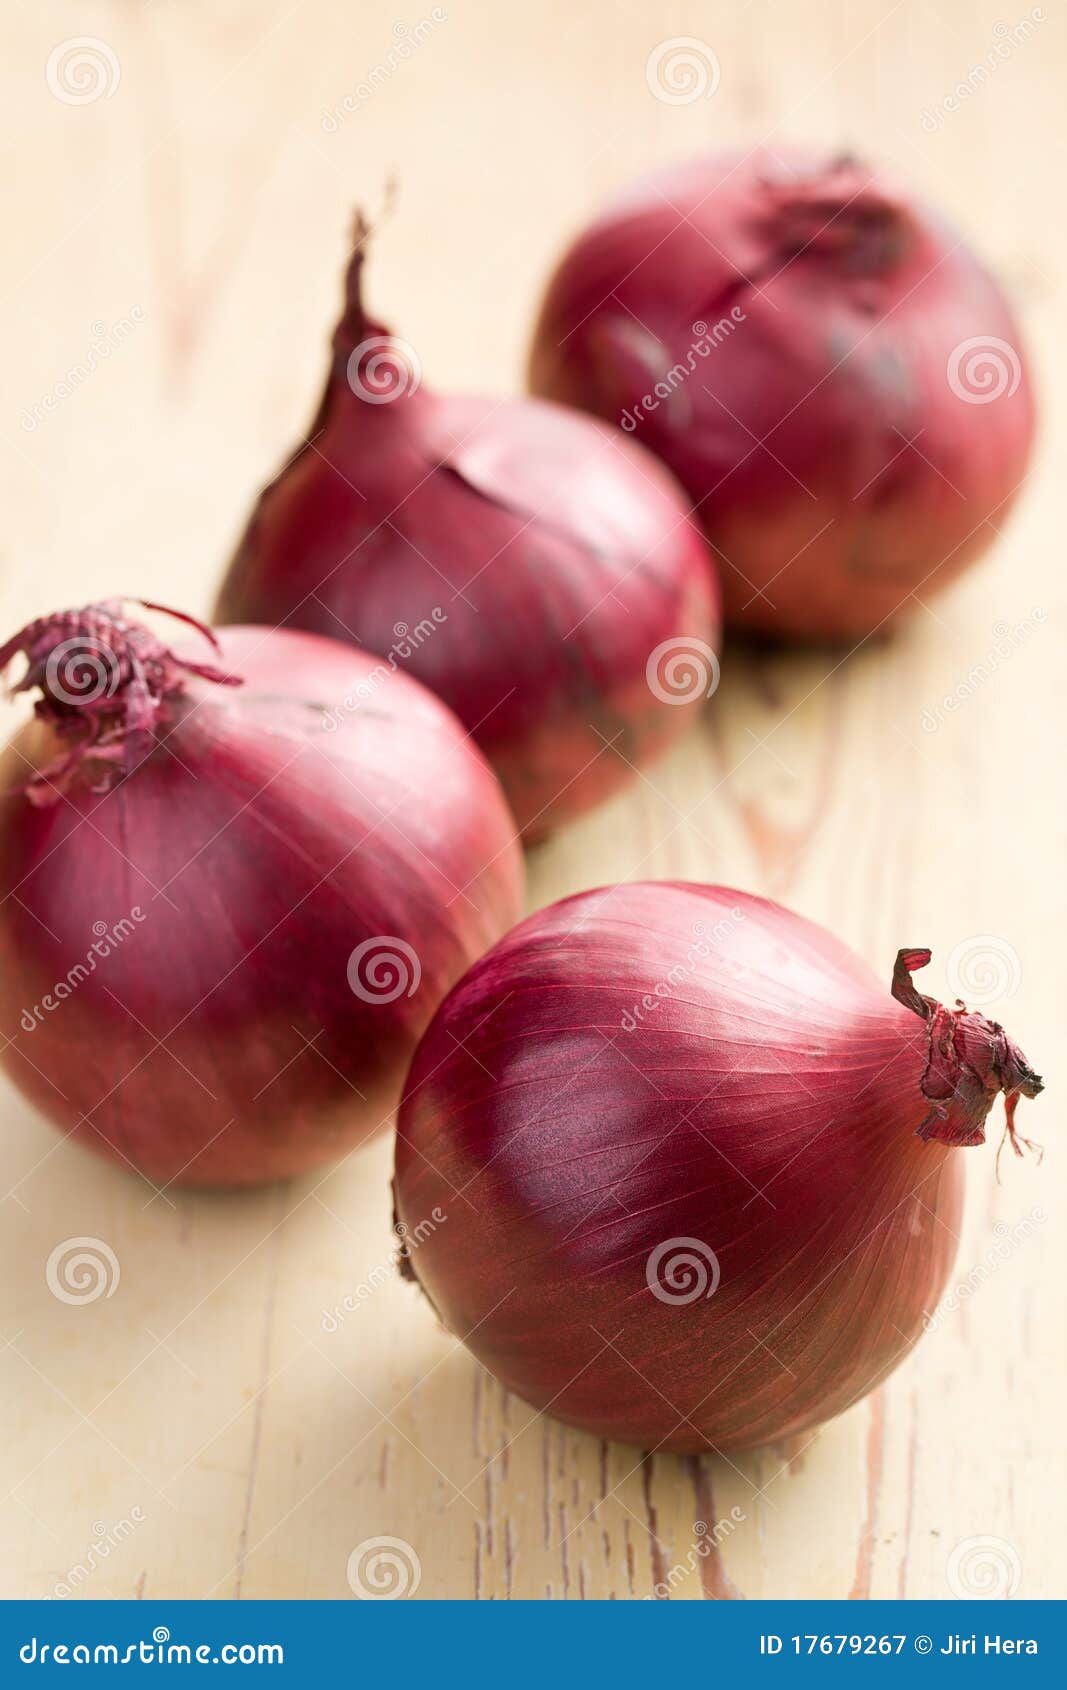 Red onion in kitchen stock image. Image of dieting, fresh - 17679267